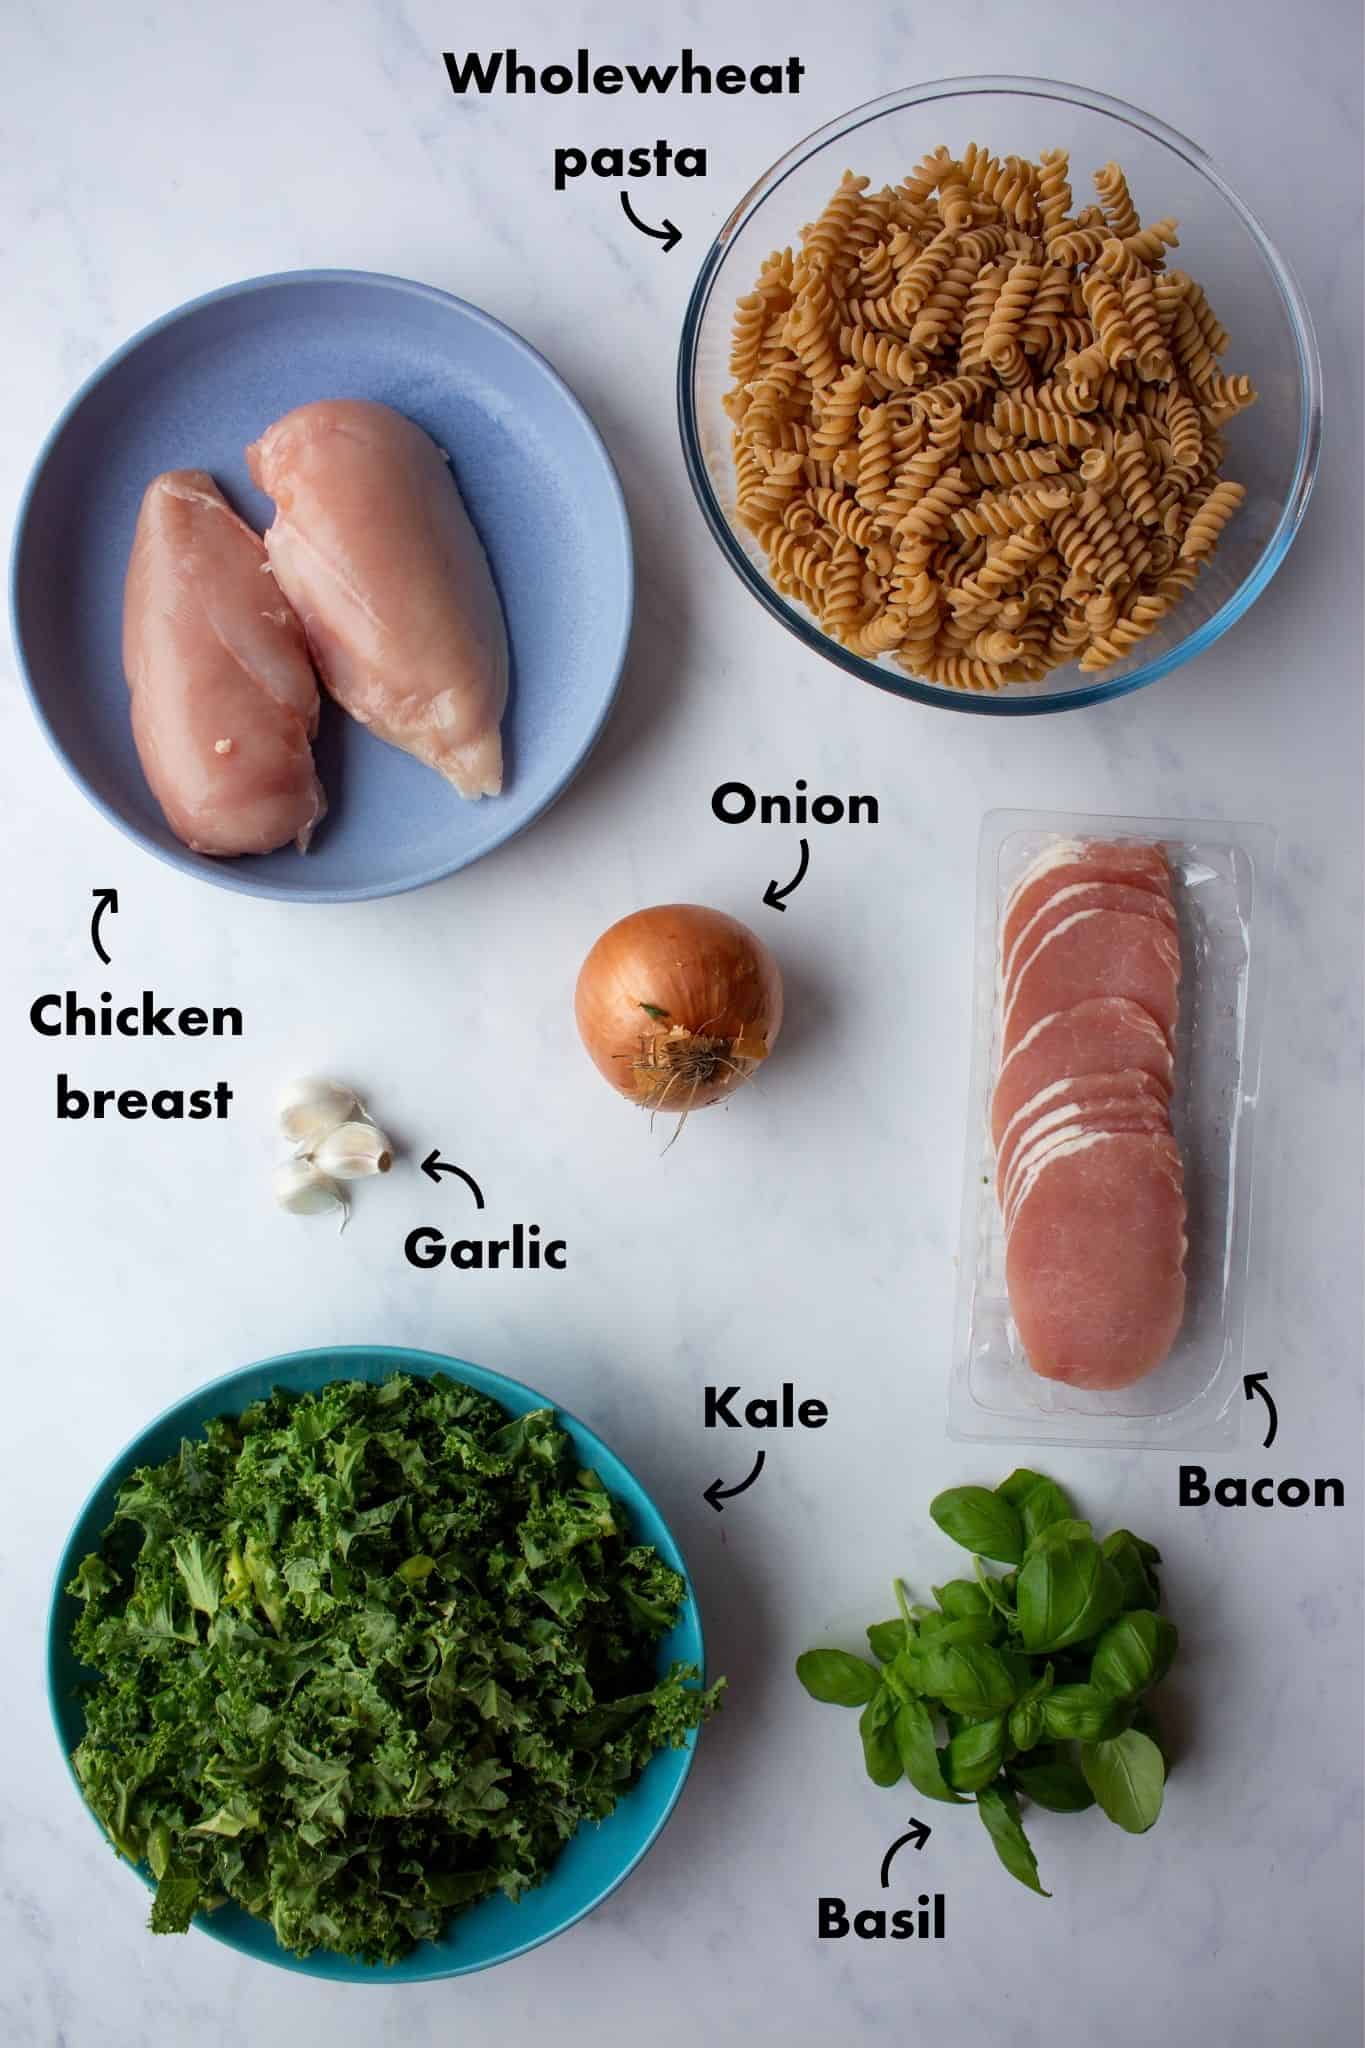 creamy chicken and bacon pasta Ingredients shot